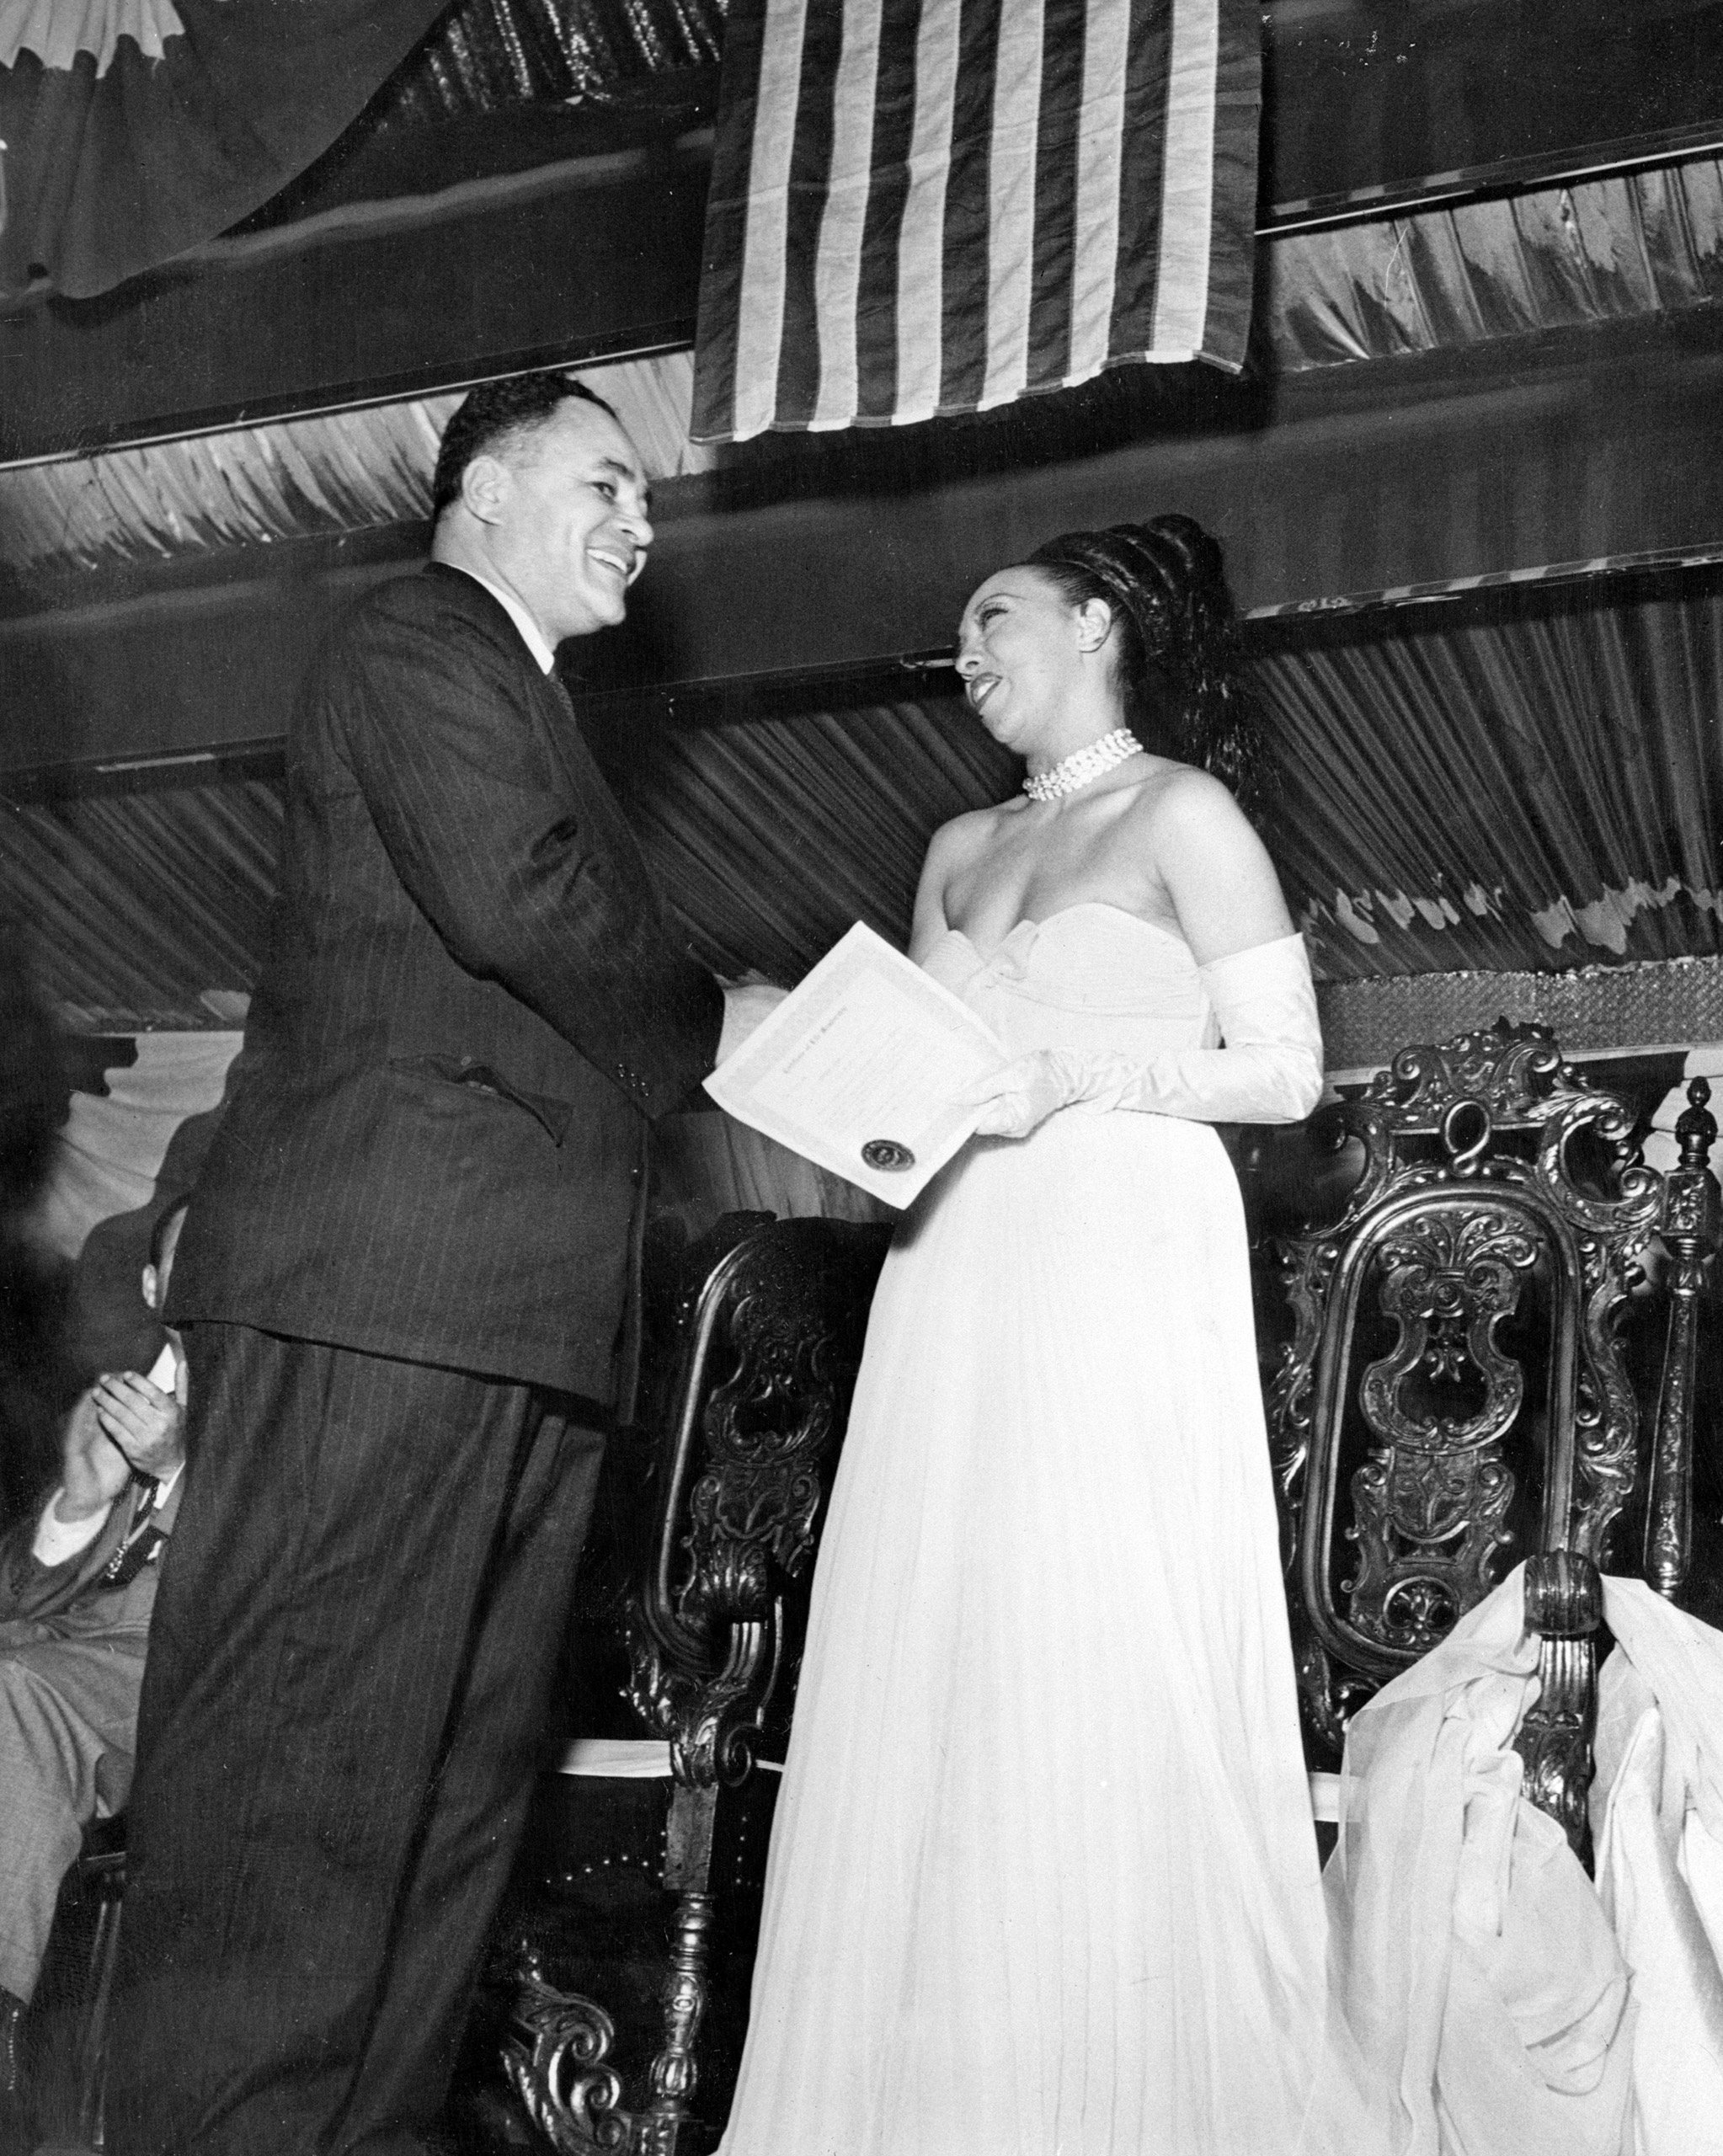 Dr. Ralph Bunche, former Palestine mediator and now director of United Nations trusteeship, serves as honorary chairman of "Jo Baker Day" honoring the well-known singer and entertainer. Dr. Bunche is shown presenting Miss Baker with Life Membership in the New York Branch of the NAACP, the sponsoring organization. 1950.